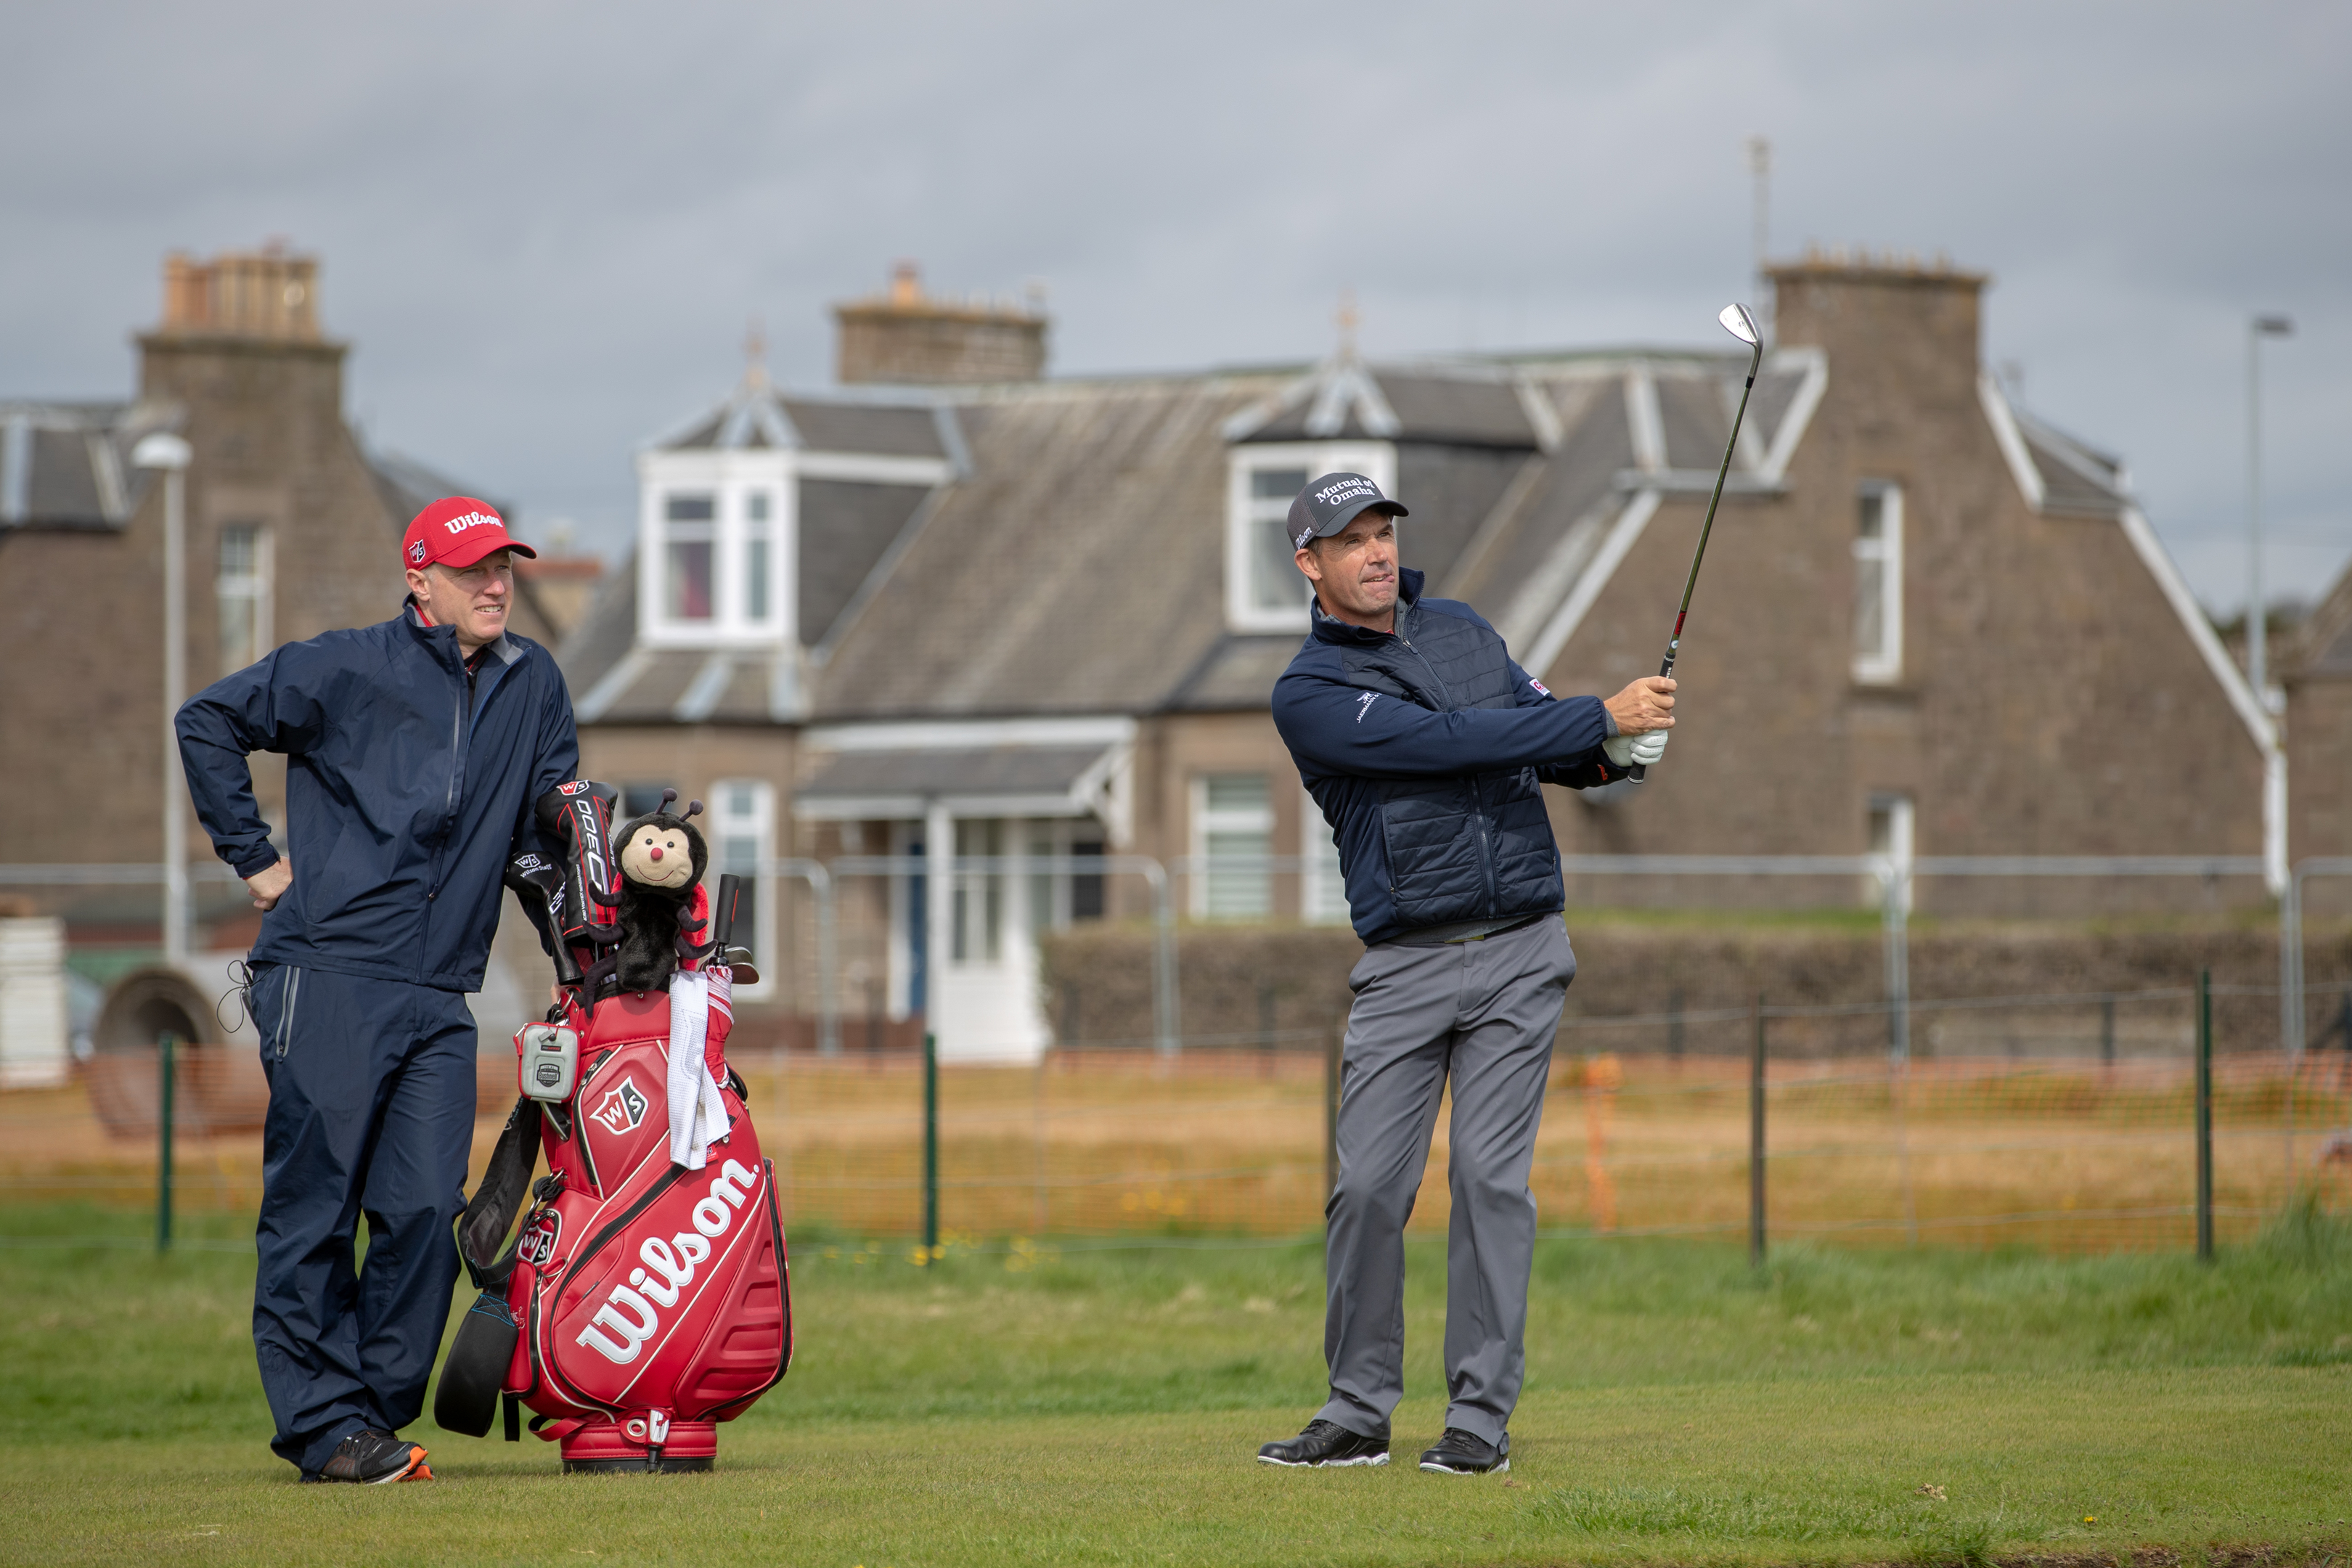 Padraig Harrington on the 18th at Carnoustie yesterday.